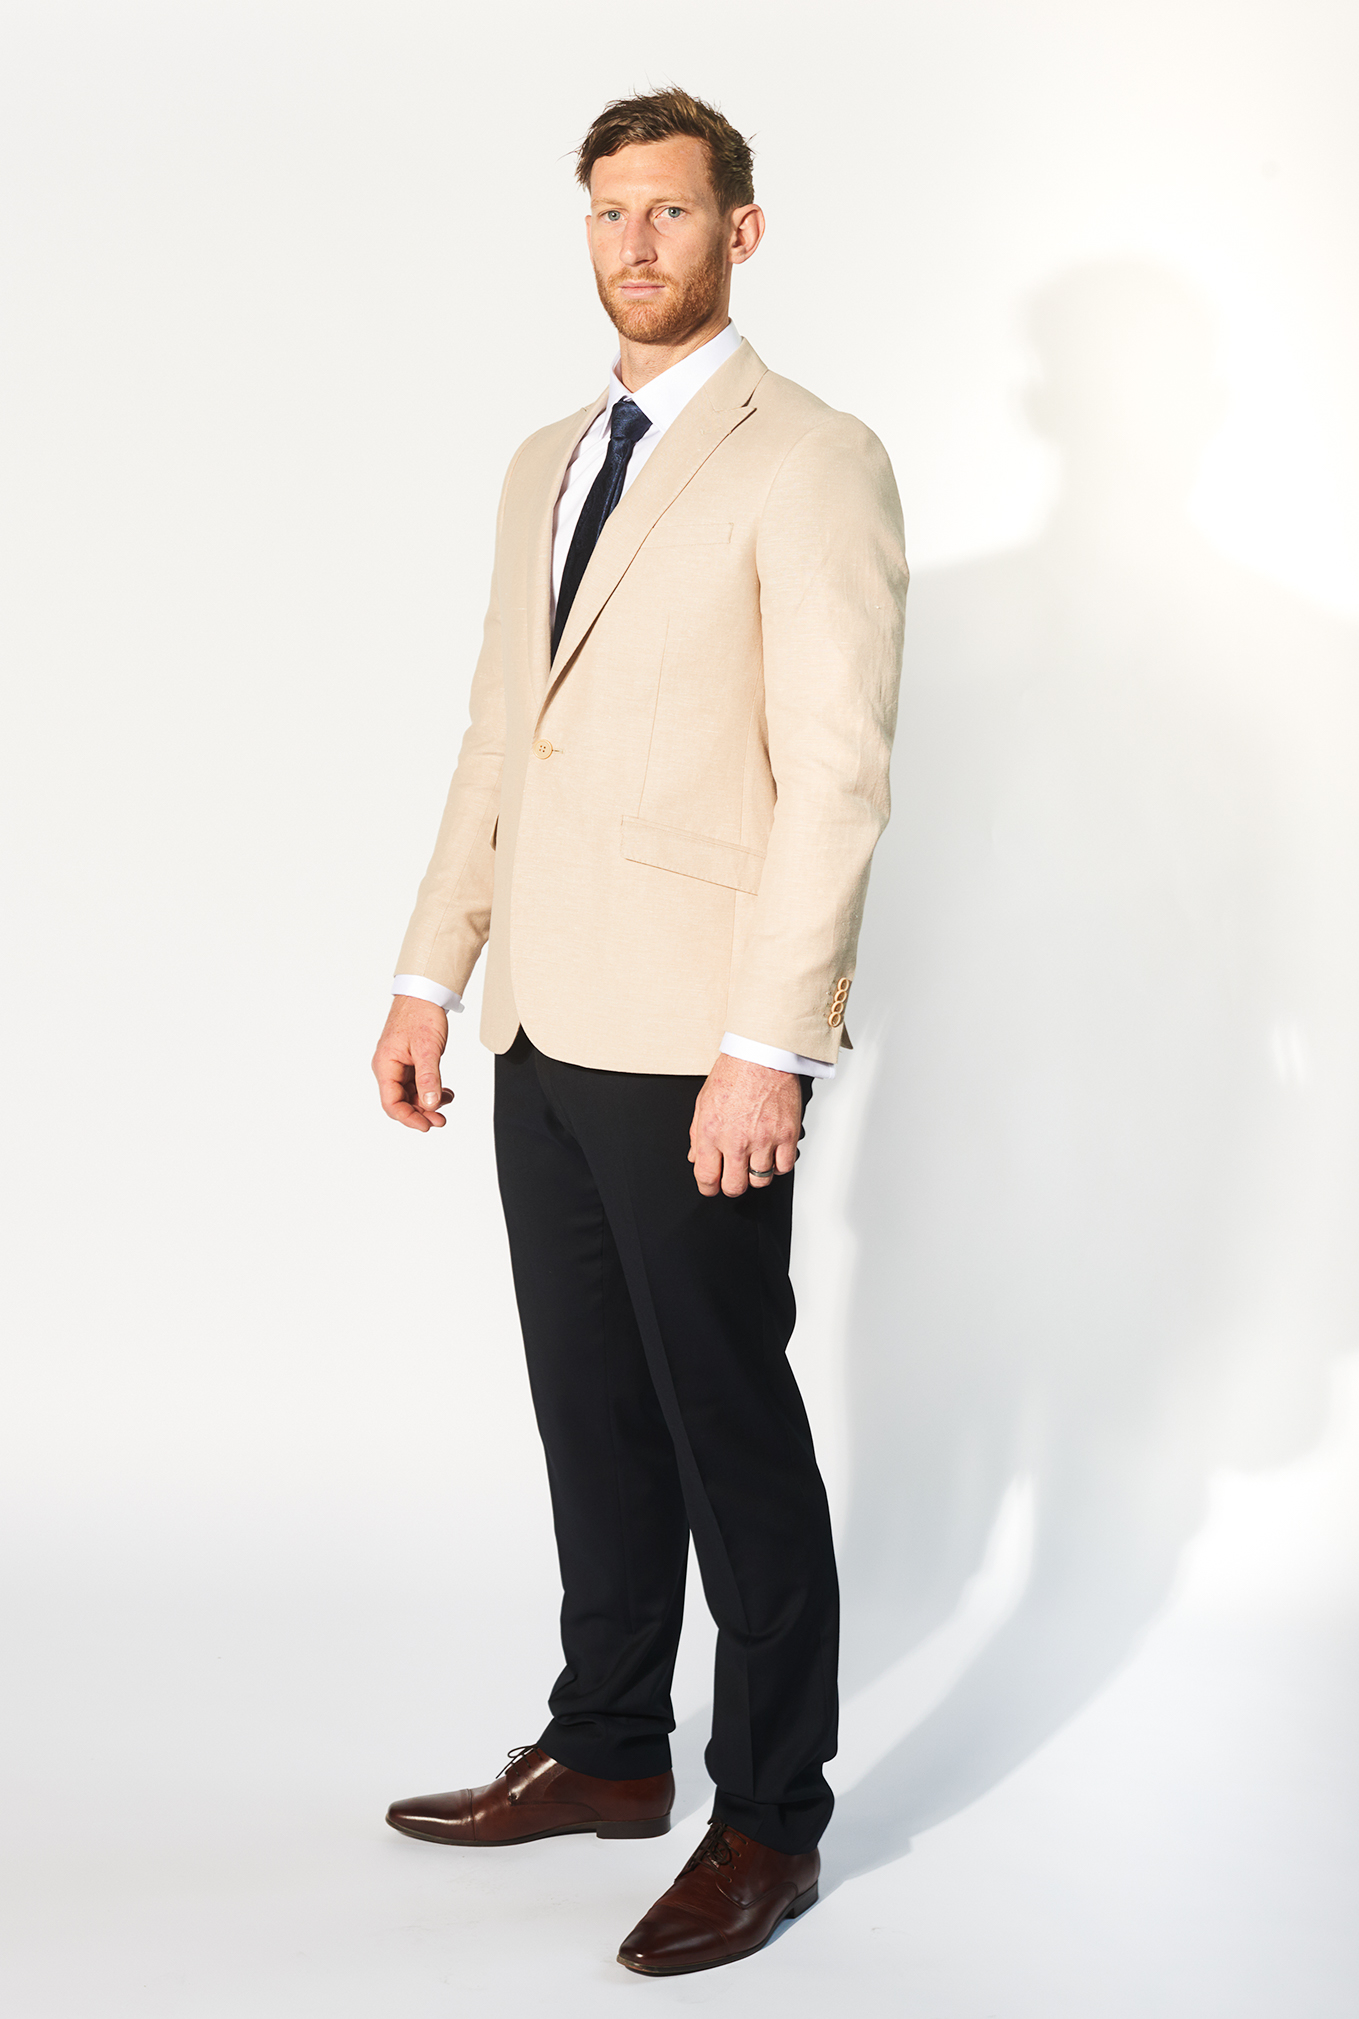 sand shade suit and black pants brittons formal wear